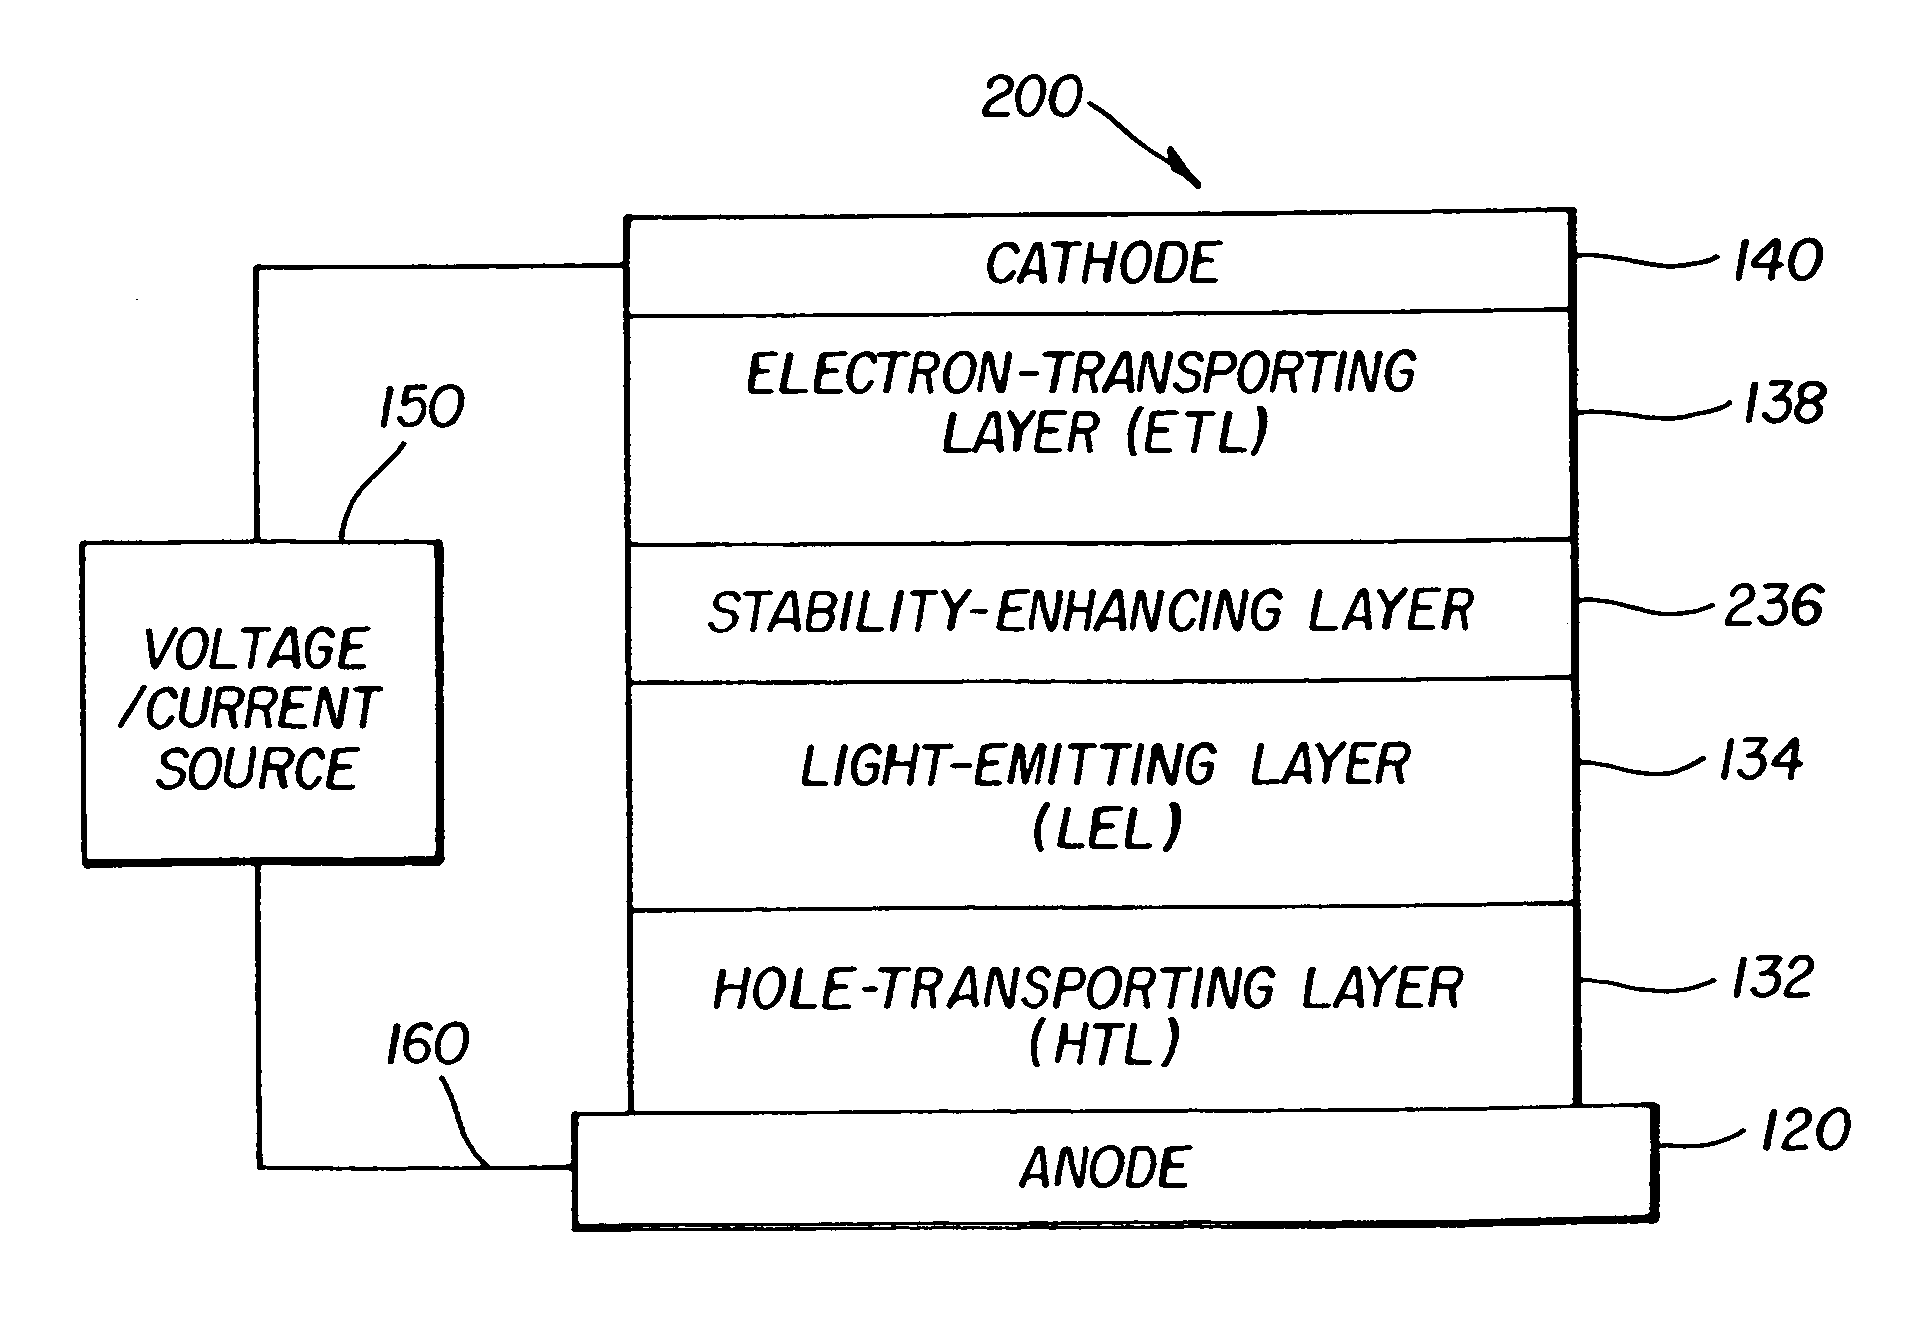 Organic electroluminescent devices having a stability-enhancing layer